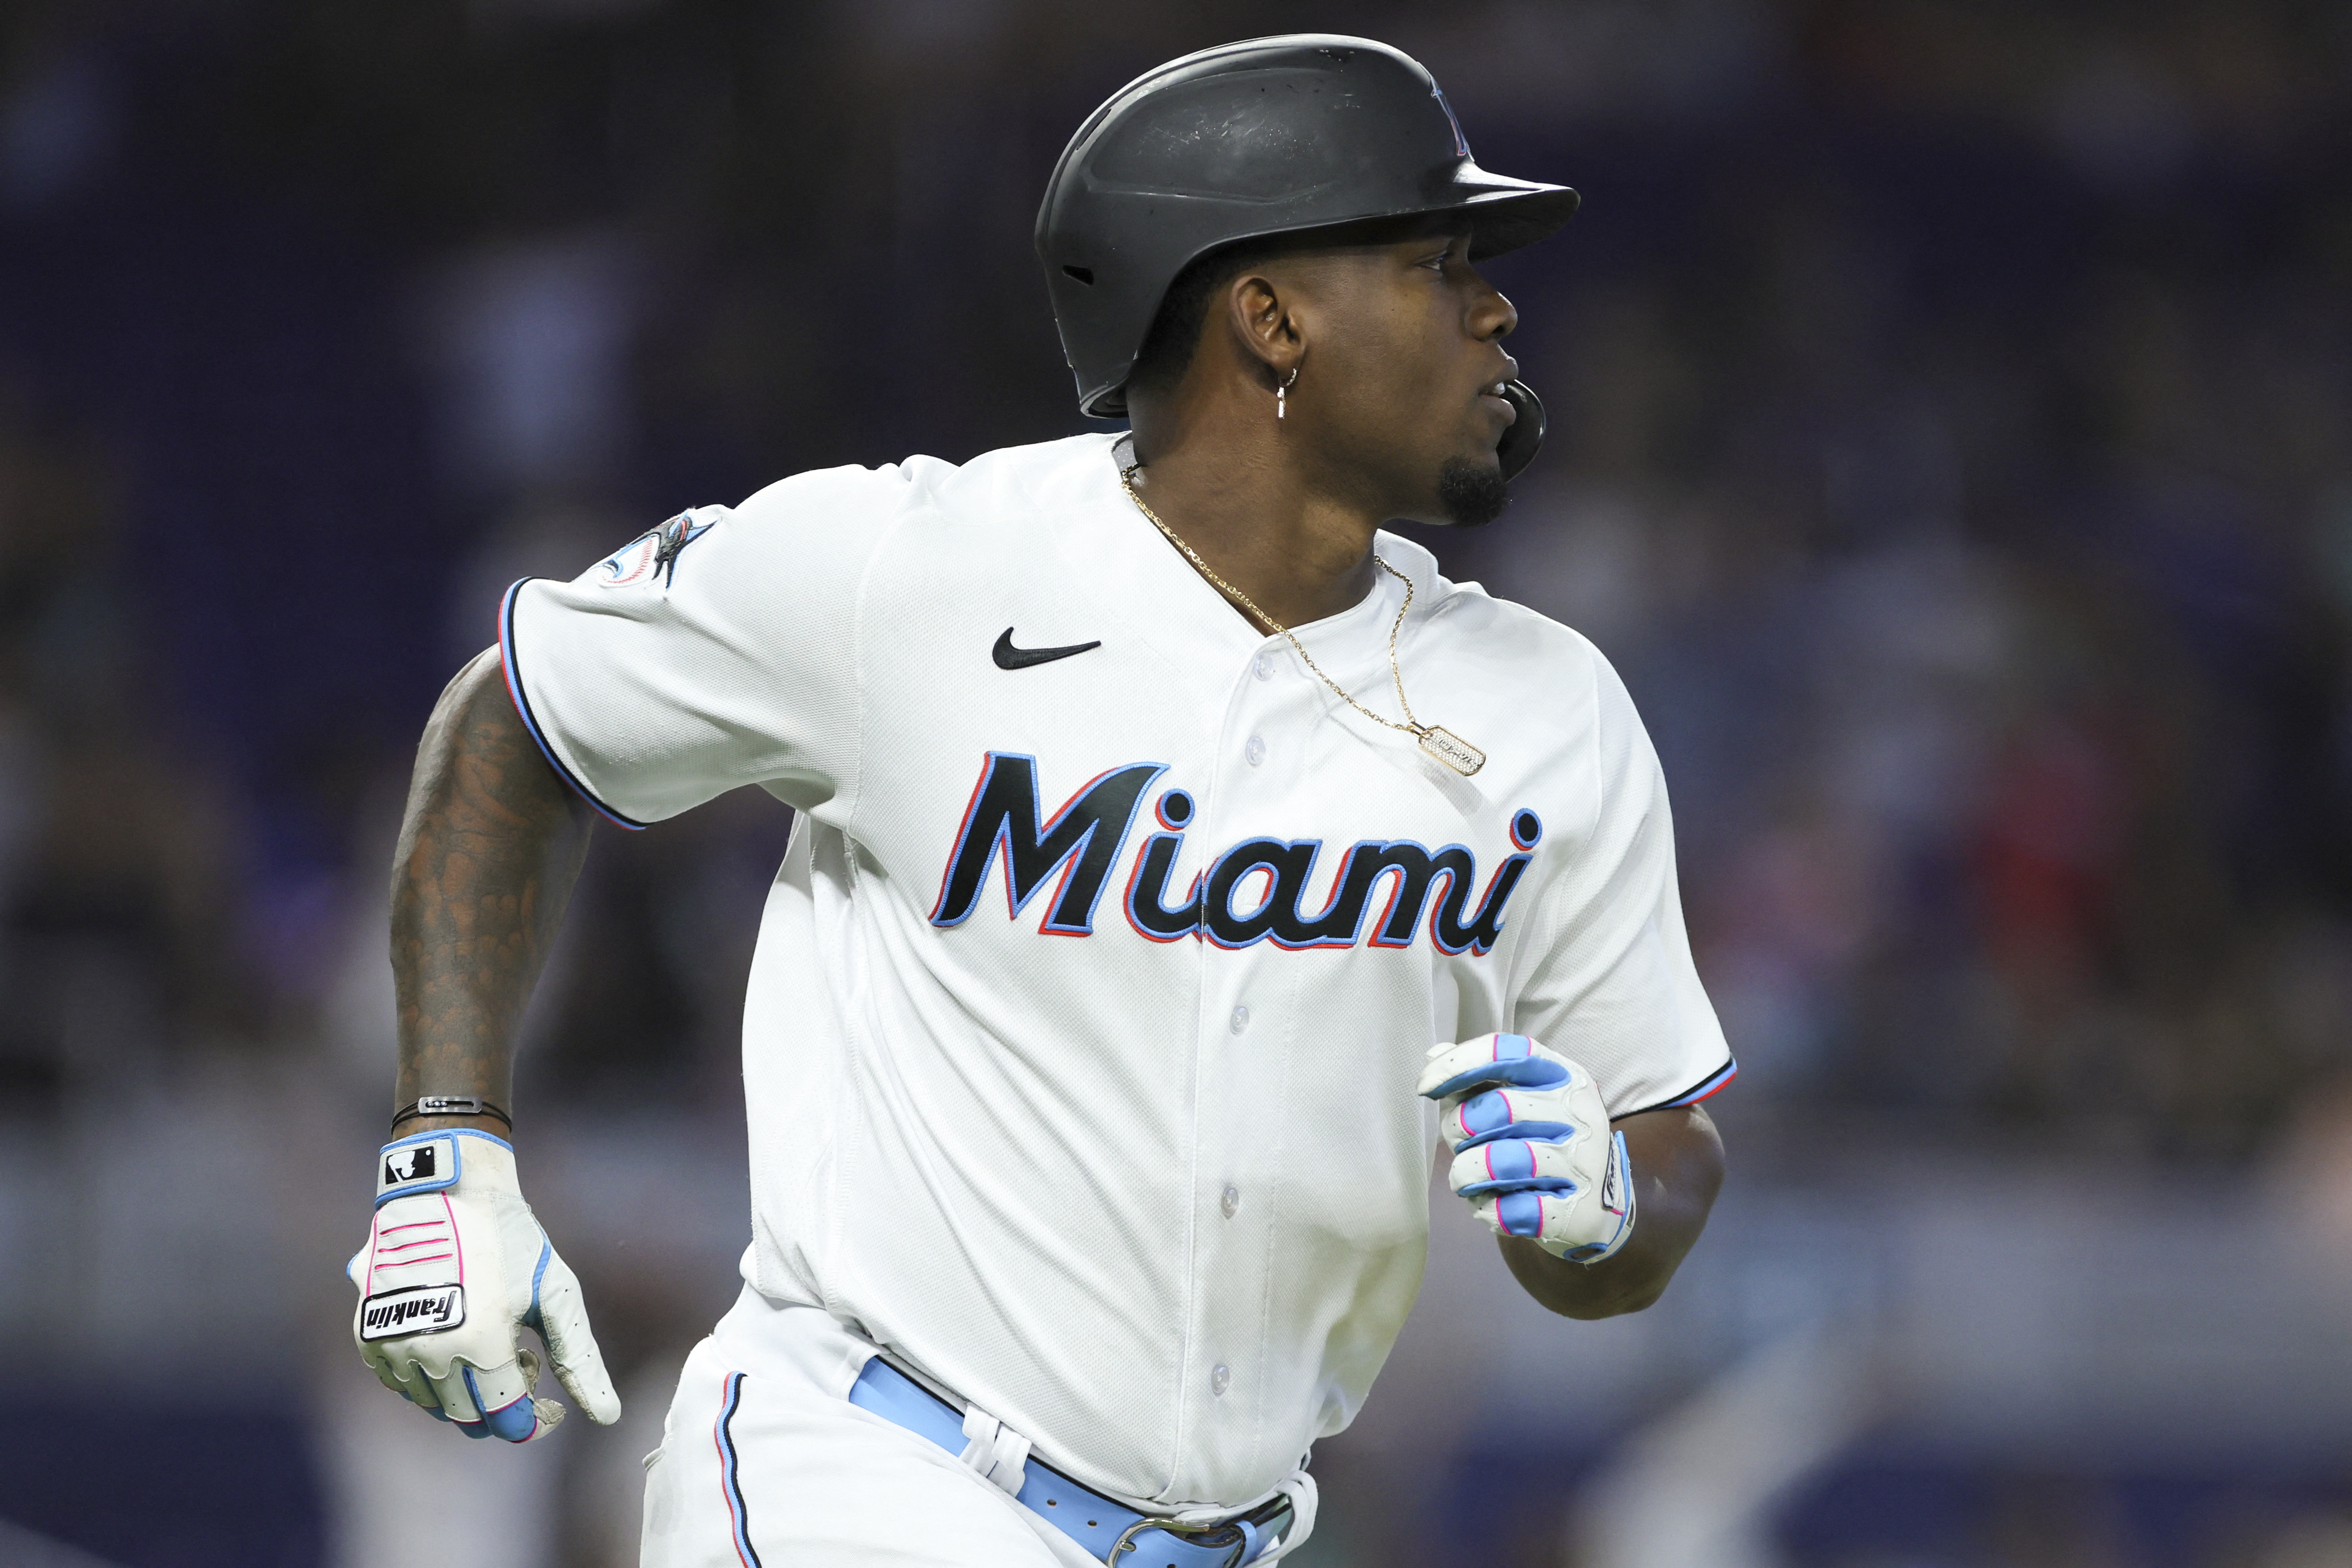 Bally Sports Florida: Marlins on X: Jorge Soler homered and made two great  plays in RF for the Marlins in tonight's win! He speaks with @KellySaco  postgame 👇 @Marlins